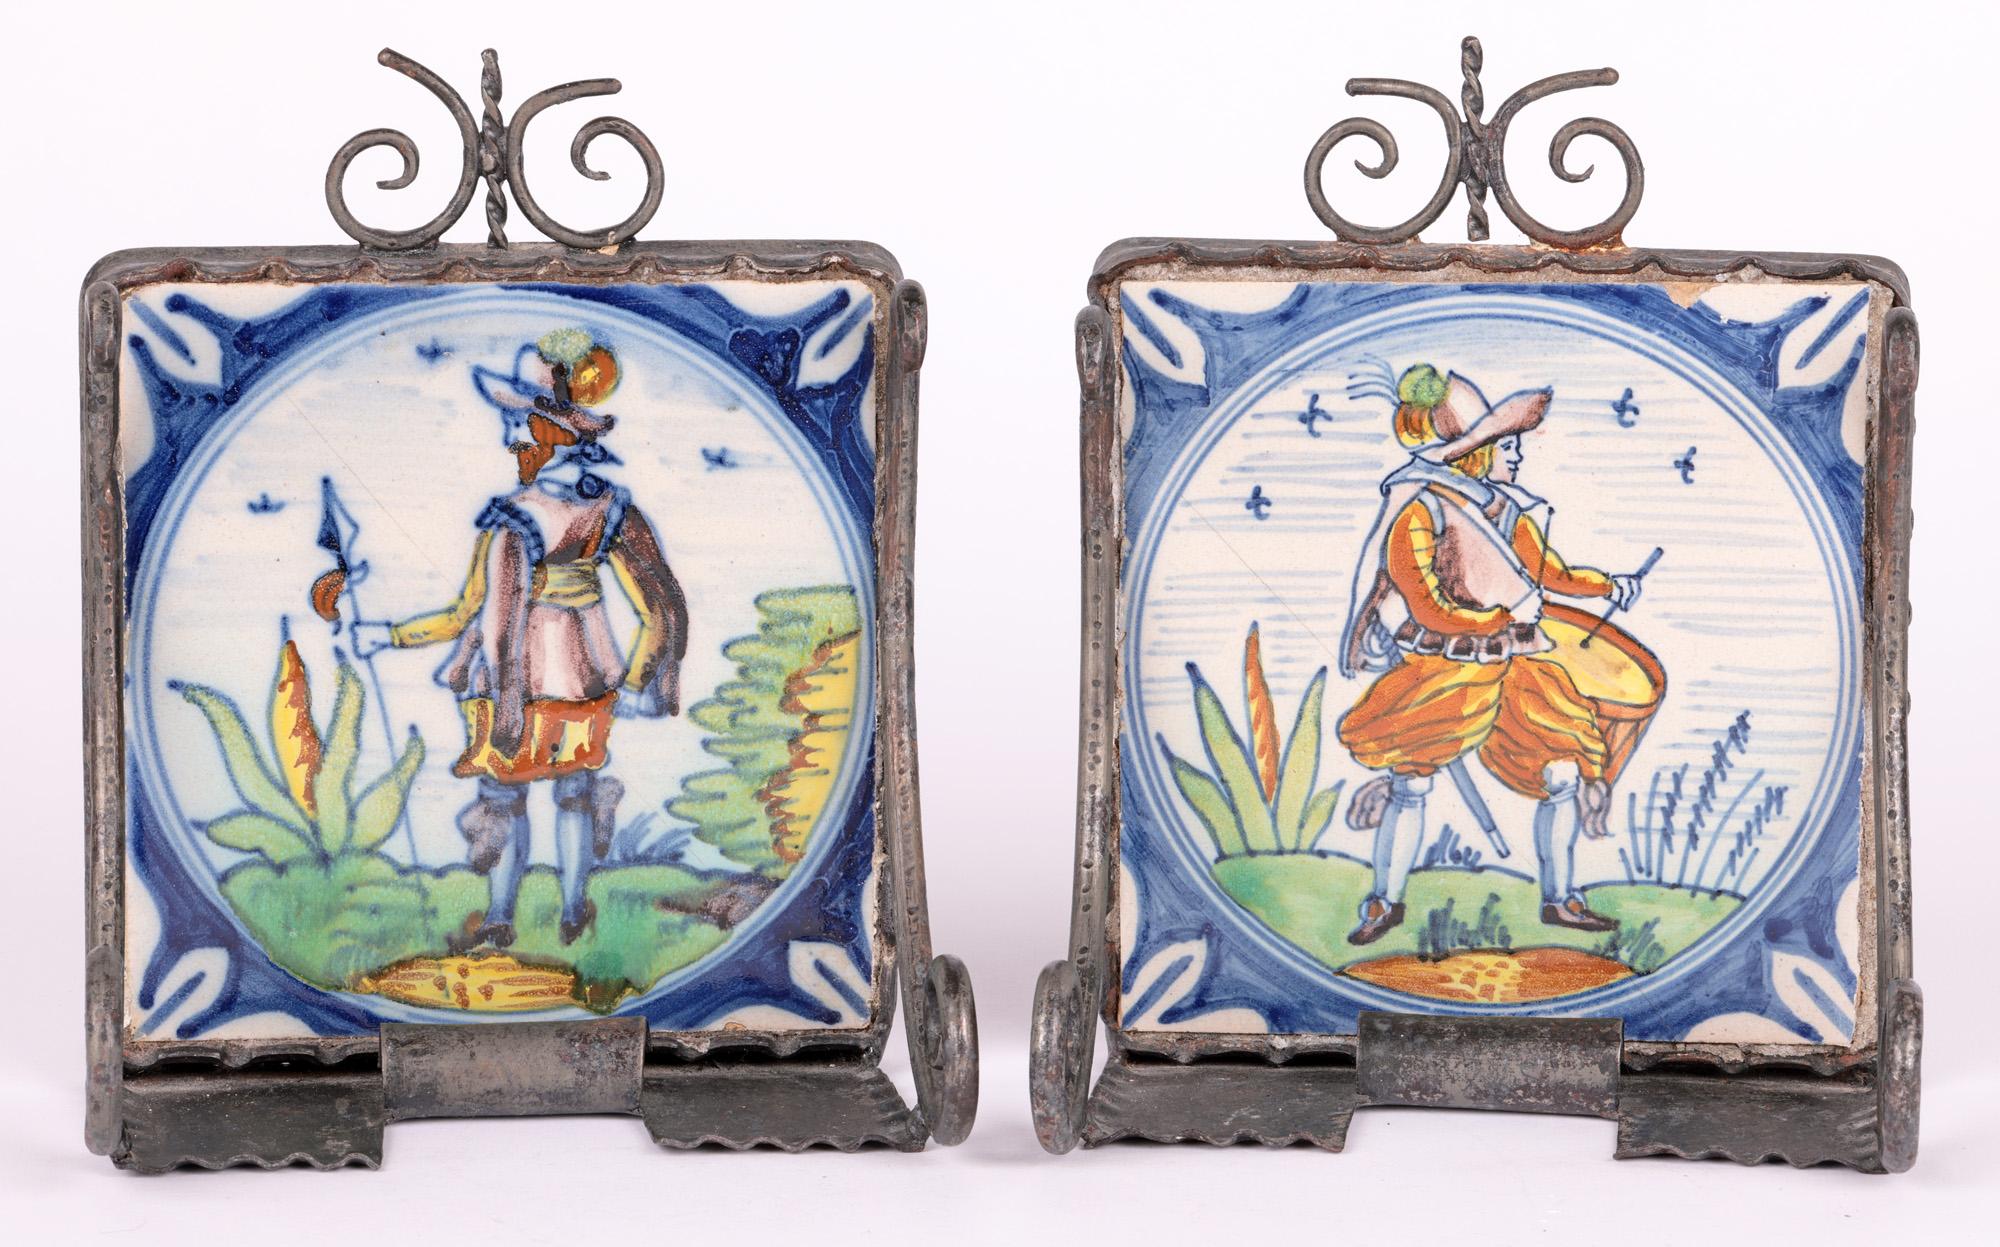 Polychrome 18th Century Tile Mounted Metal Bookends 12